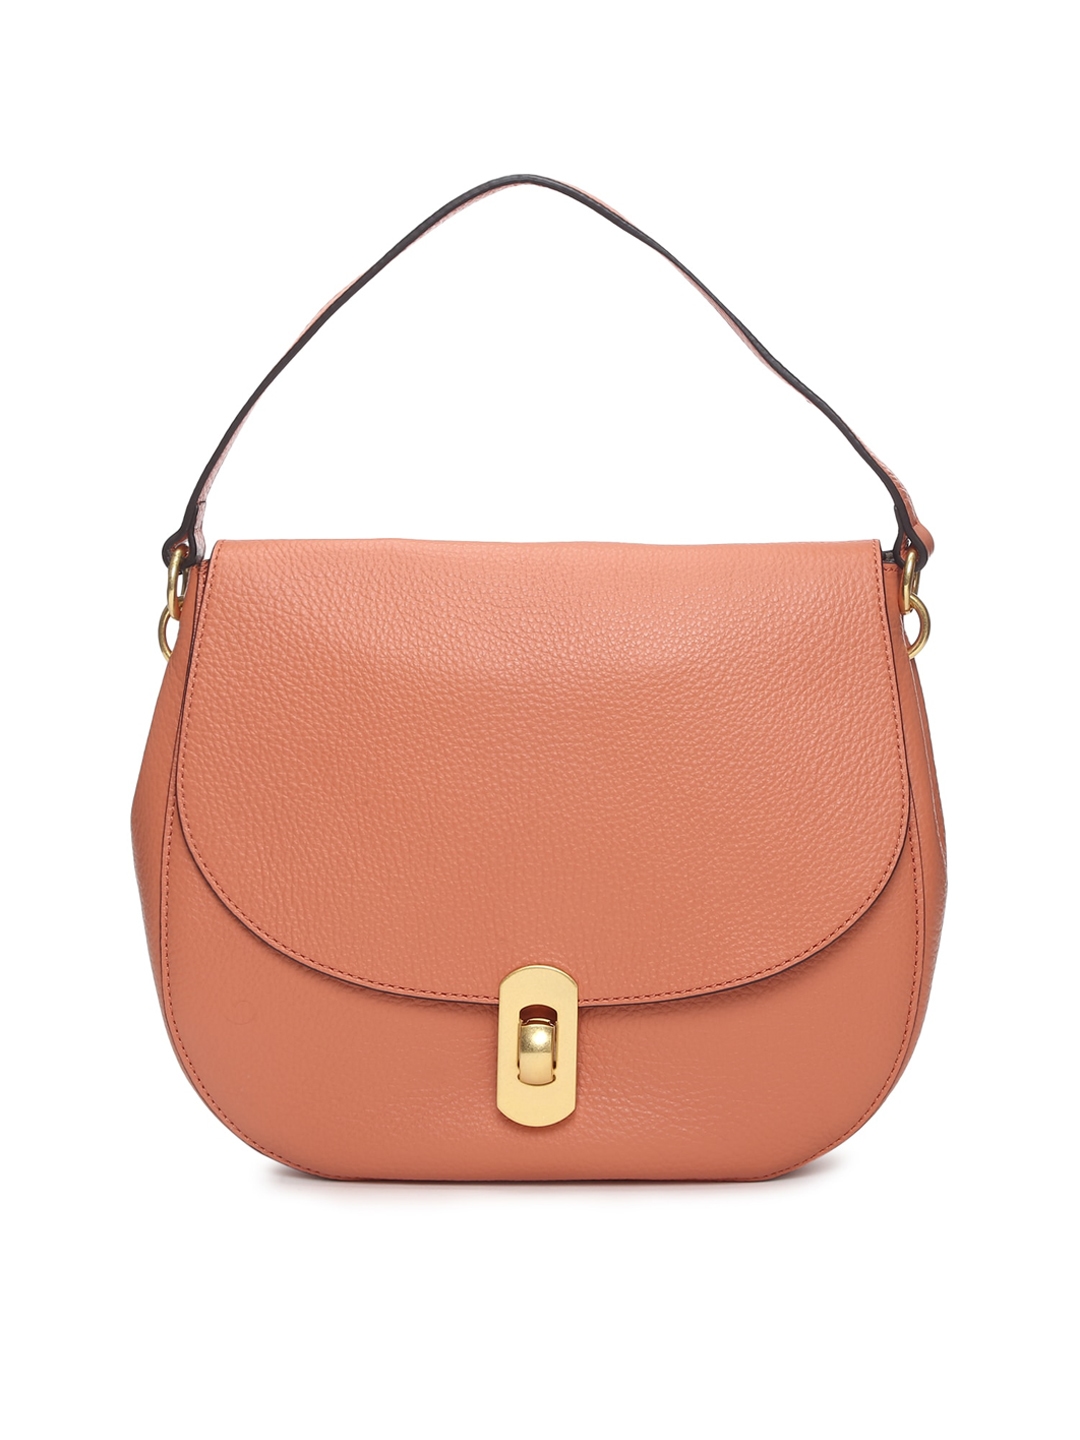 Coccinelle Peach-Coloured Leather Structured Handheld Bag